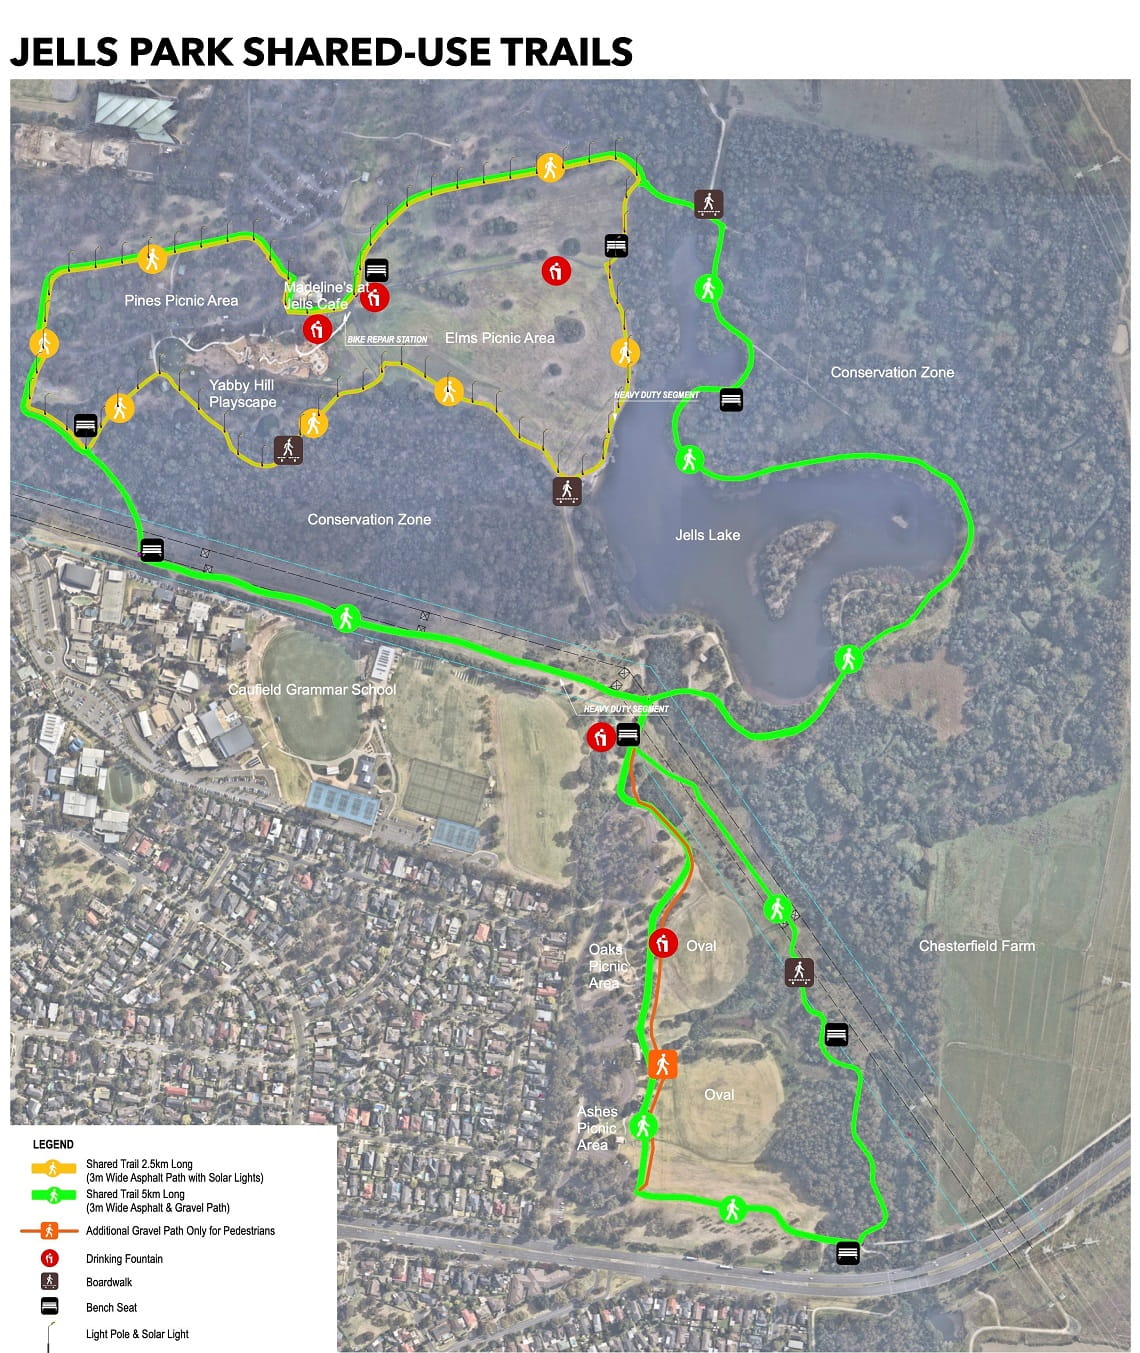 Shared-use trail draft plan for Jells Park